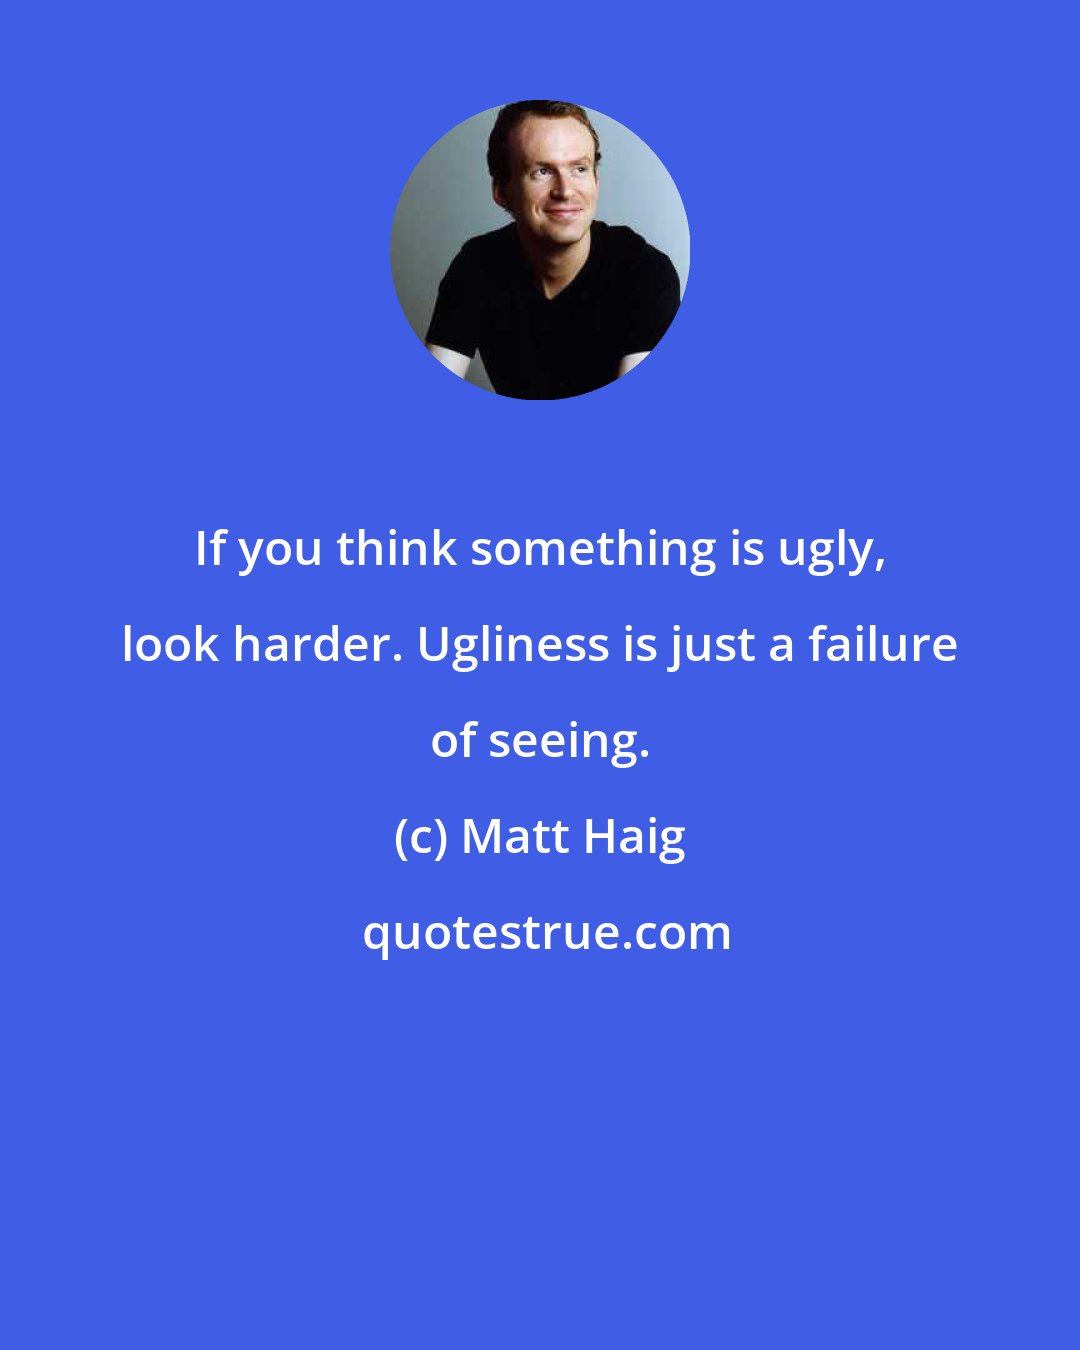 Matt Haig: If you think something is ugly, look harder. Ugliness is just a failure of seeing.